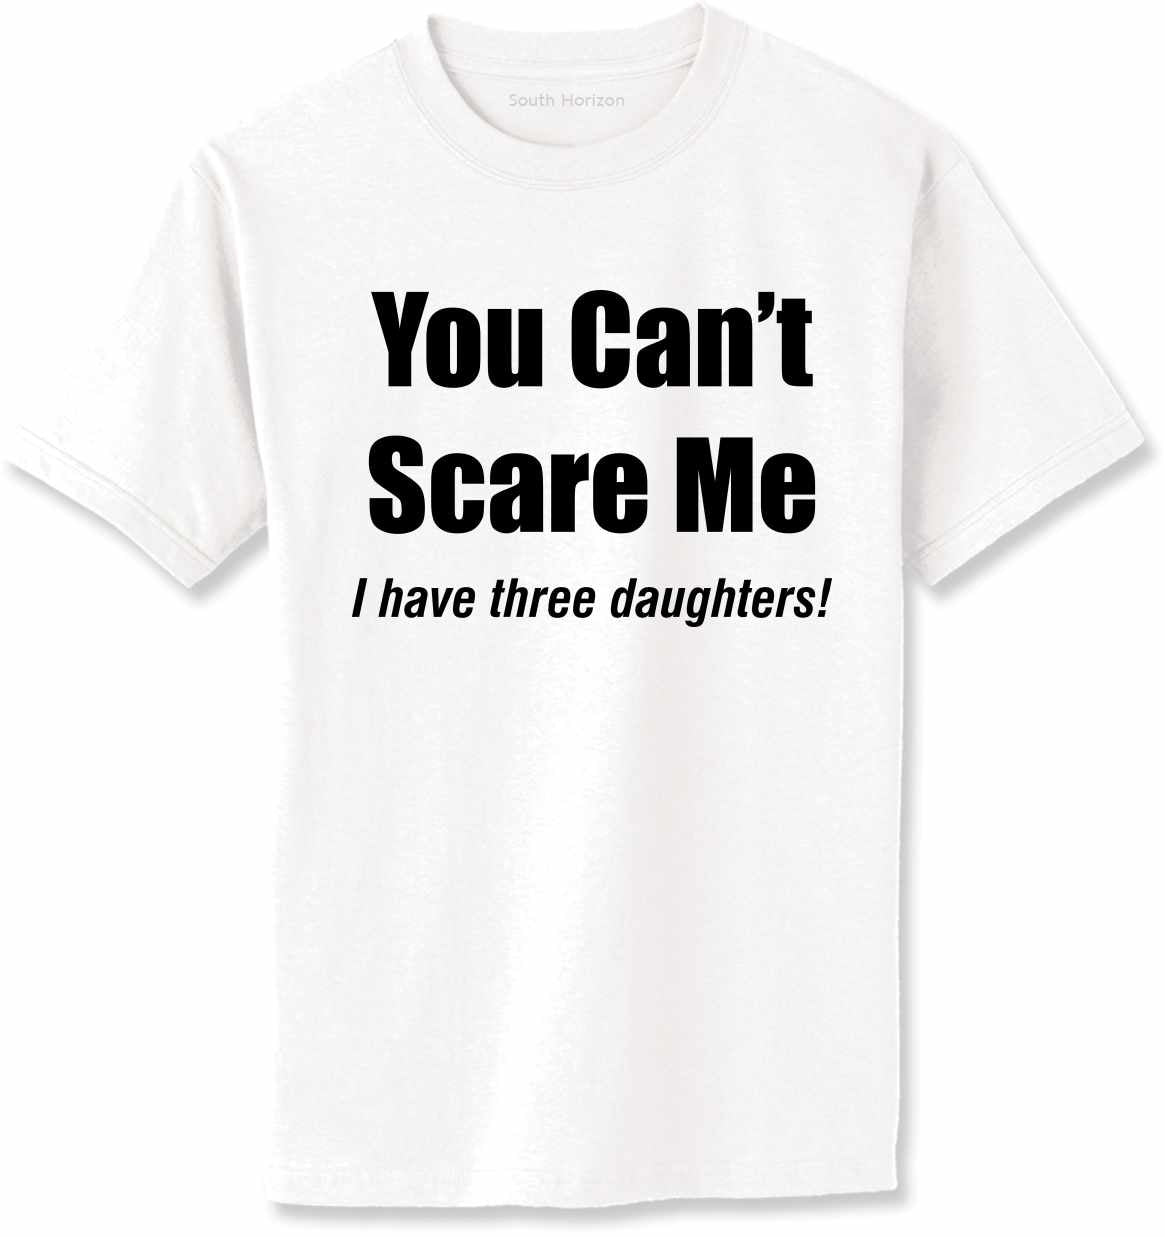 You Can't Scare Me, I have three daughters Adult T-Shirt (#950-1)